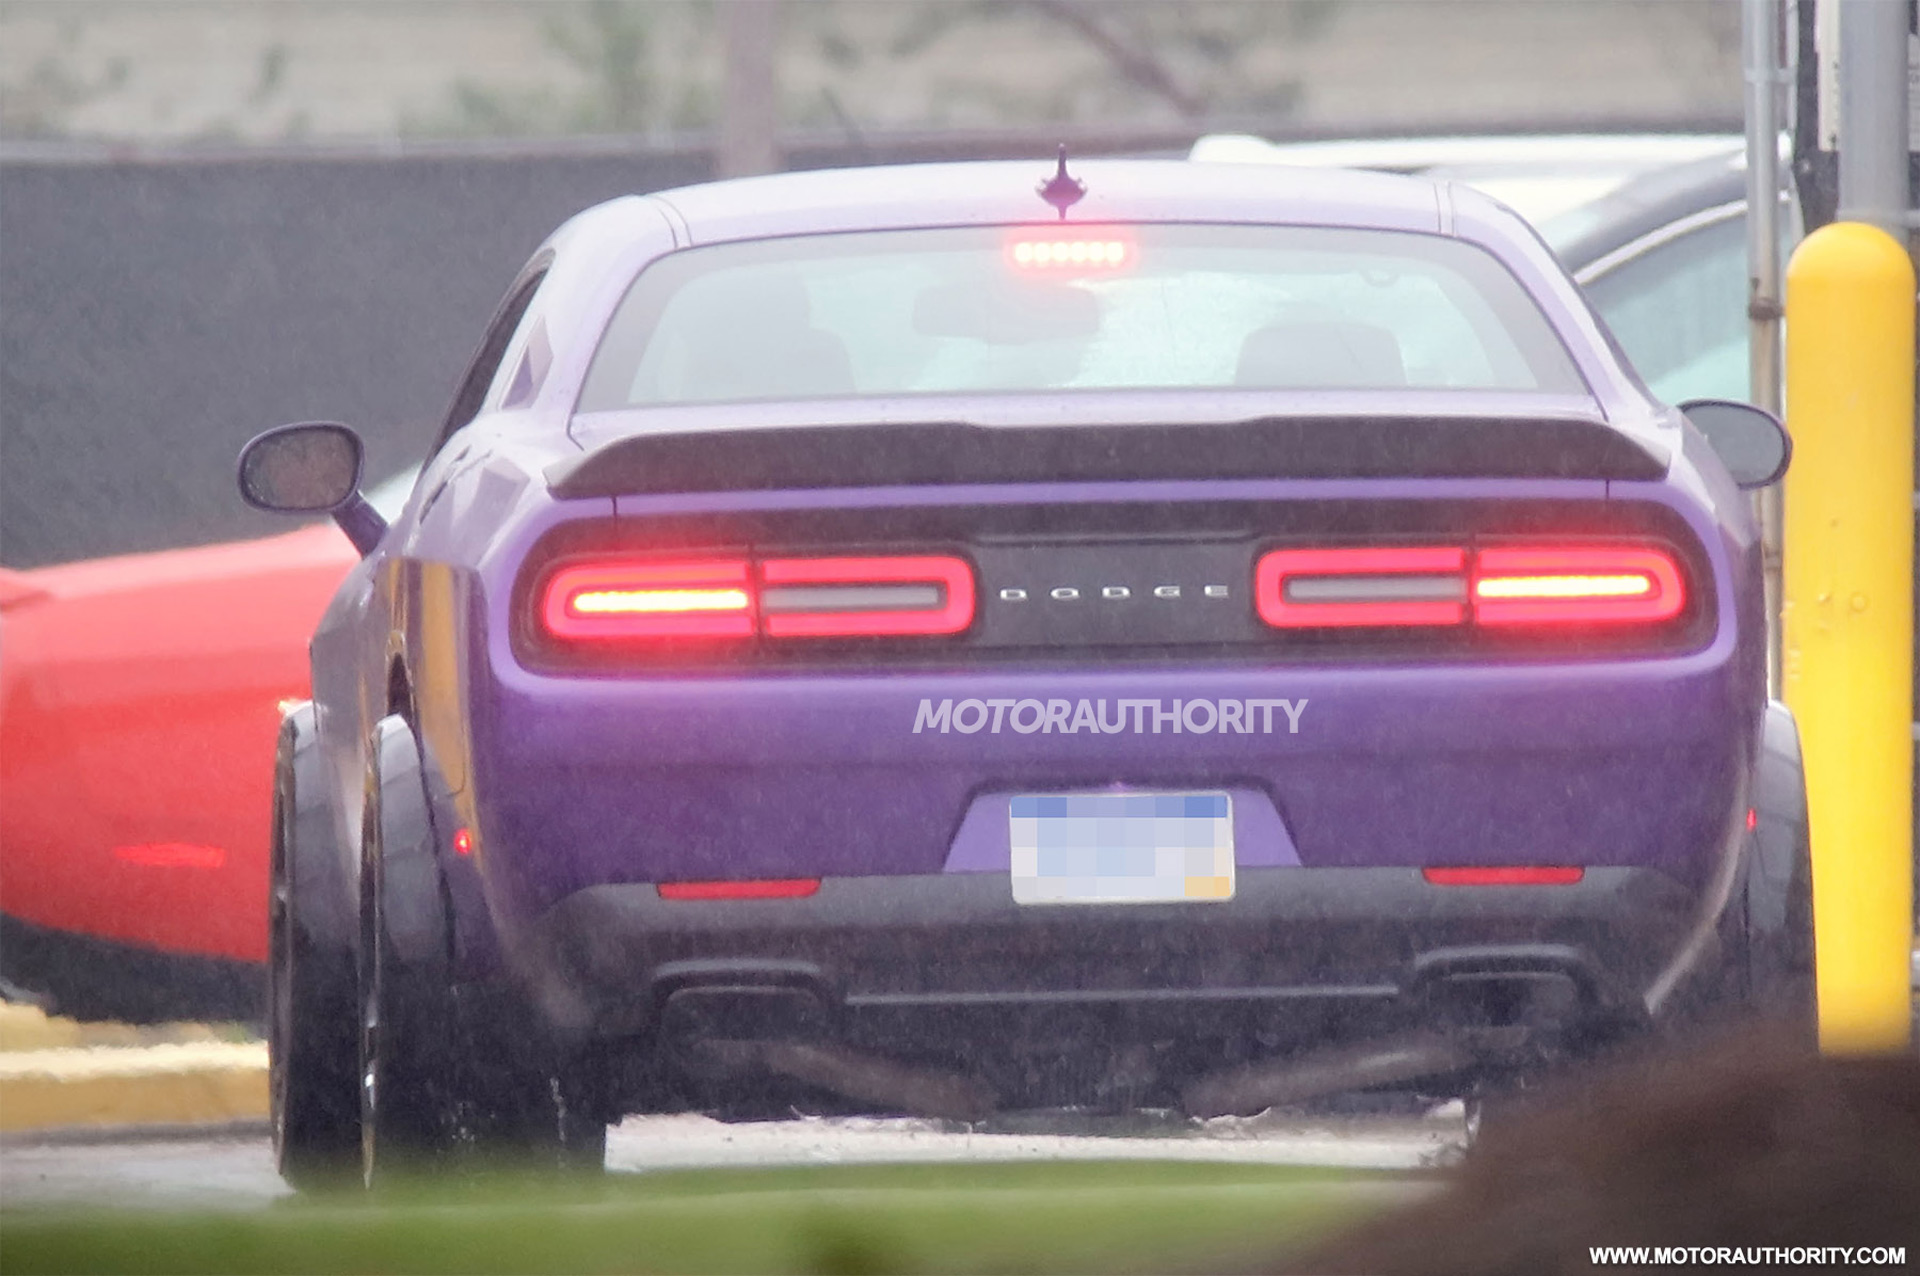 Ford Bronco confirmed, wide-body Dodge Challenger spied ...